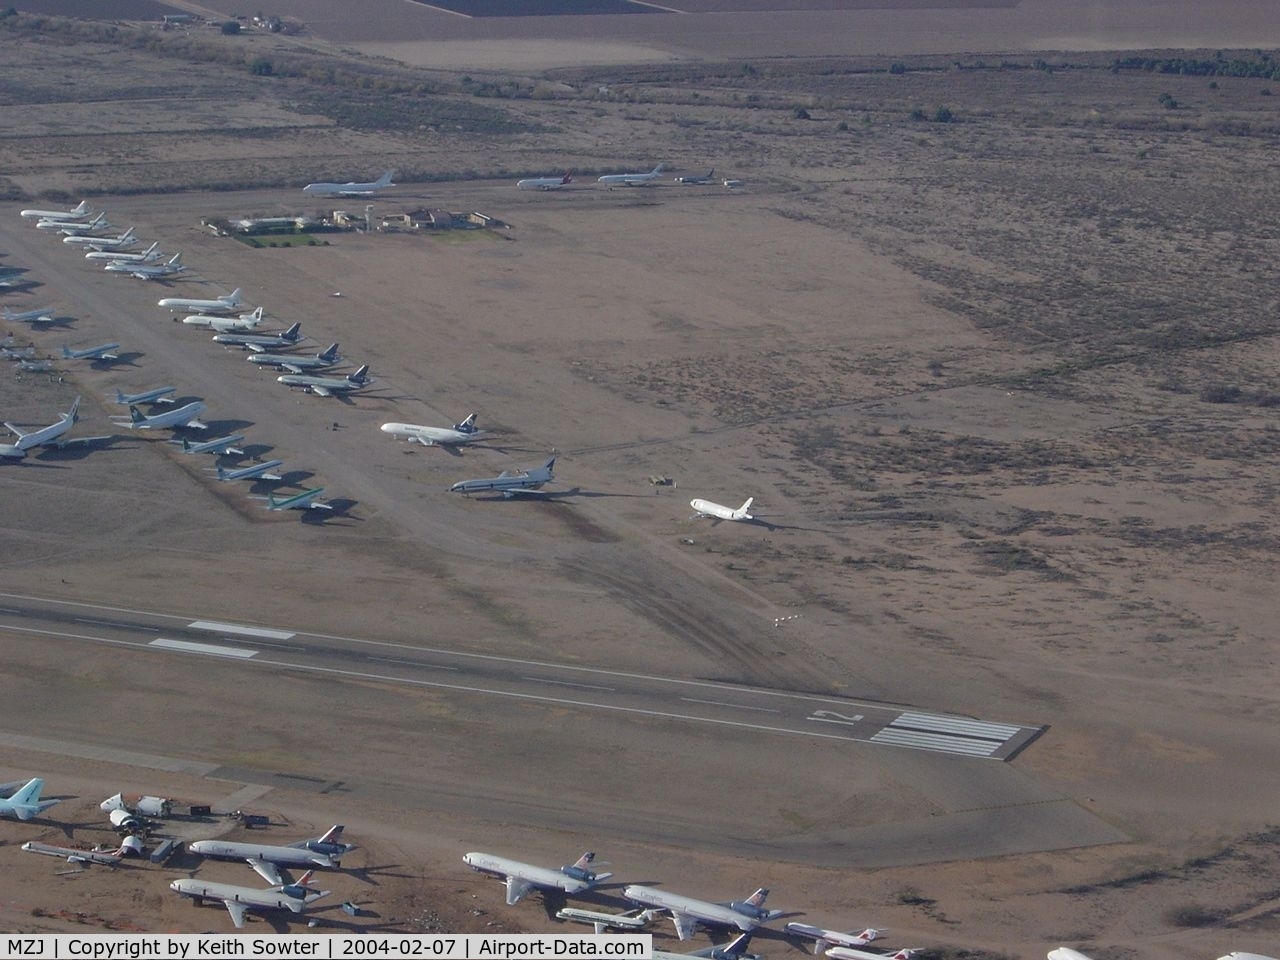 Pinal Airpark Airport (MZJ) - Image taken through perspex window of aircraft whilst overflying / taxying around 